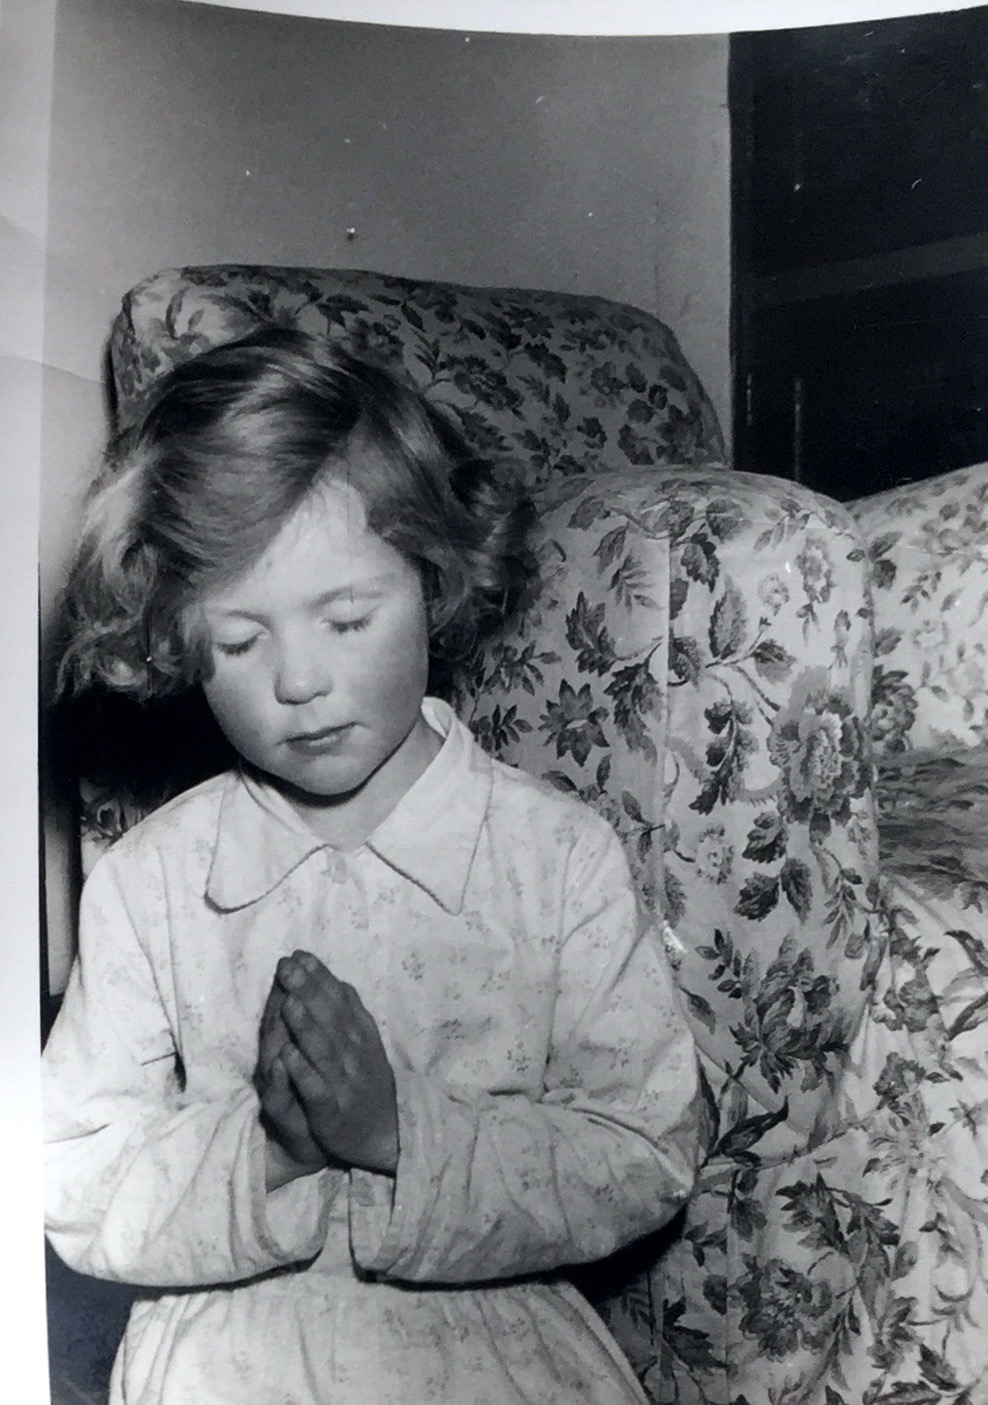 This is me in 1953! Obviously praying for toys at Xmas!